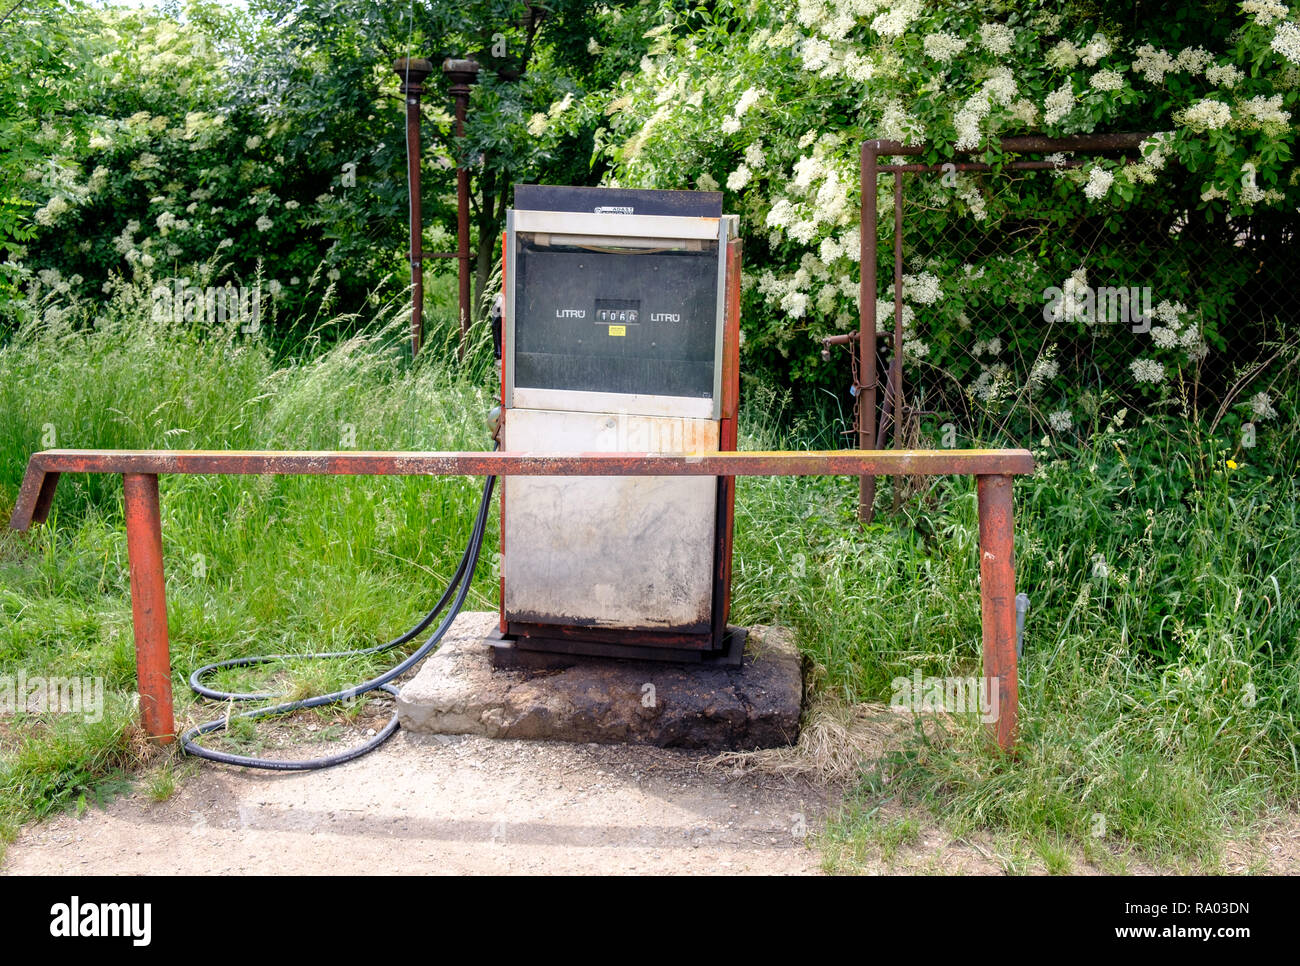 Old petrol pump in the Czech Republic countryside Stock Photo